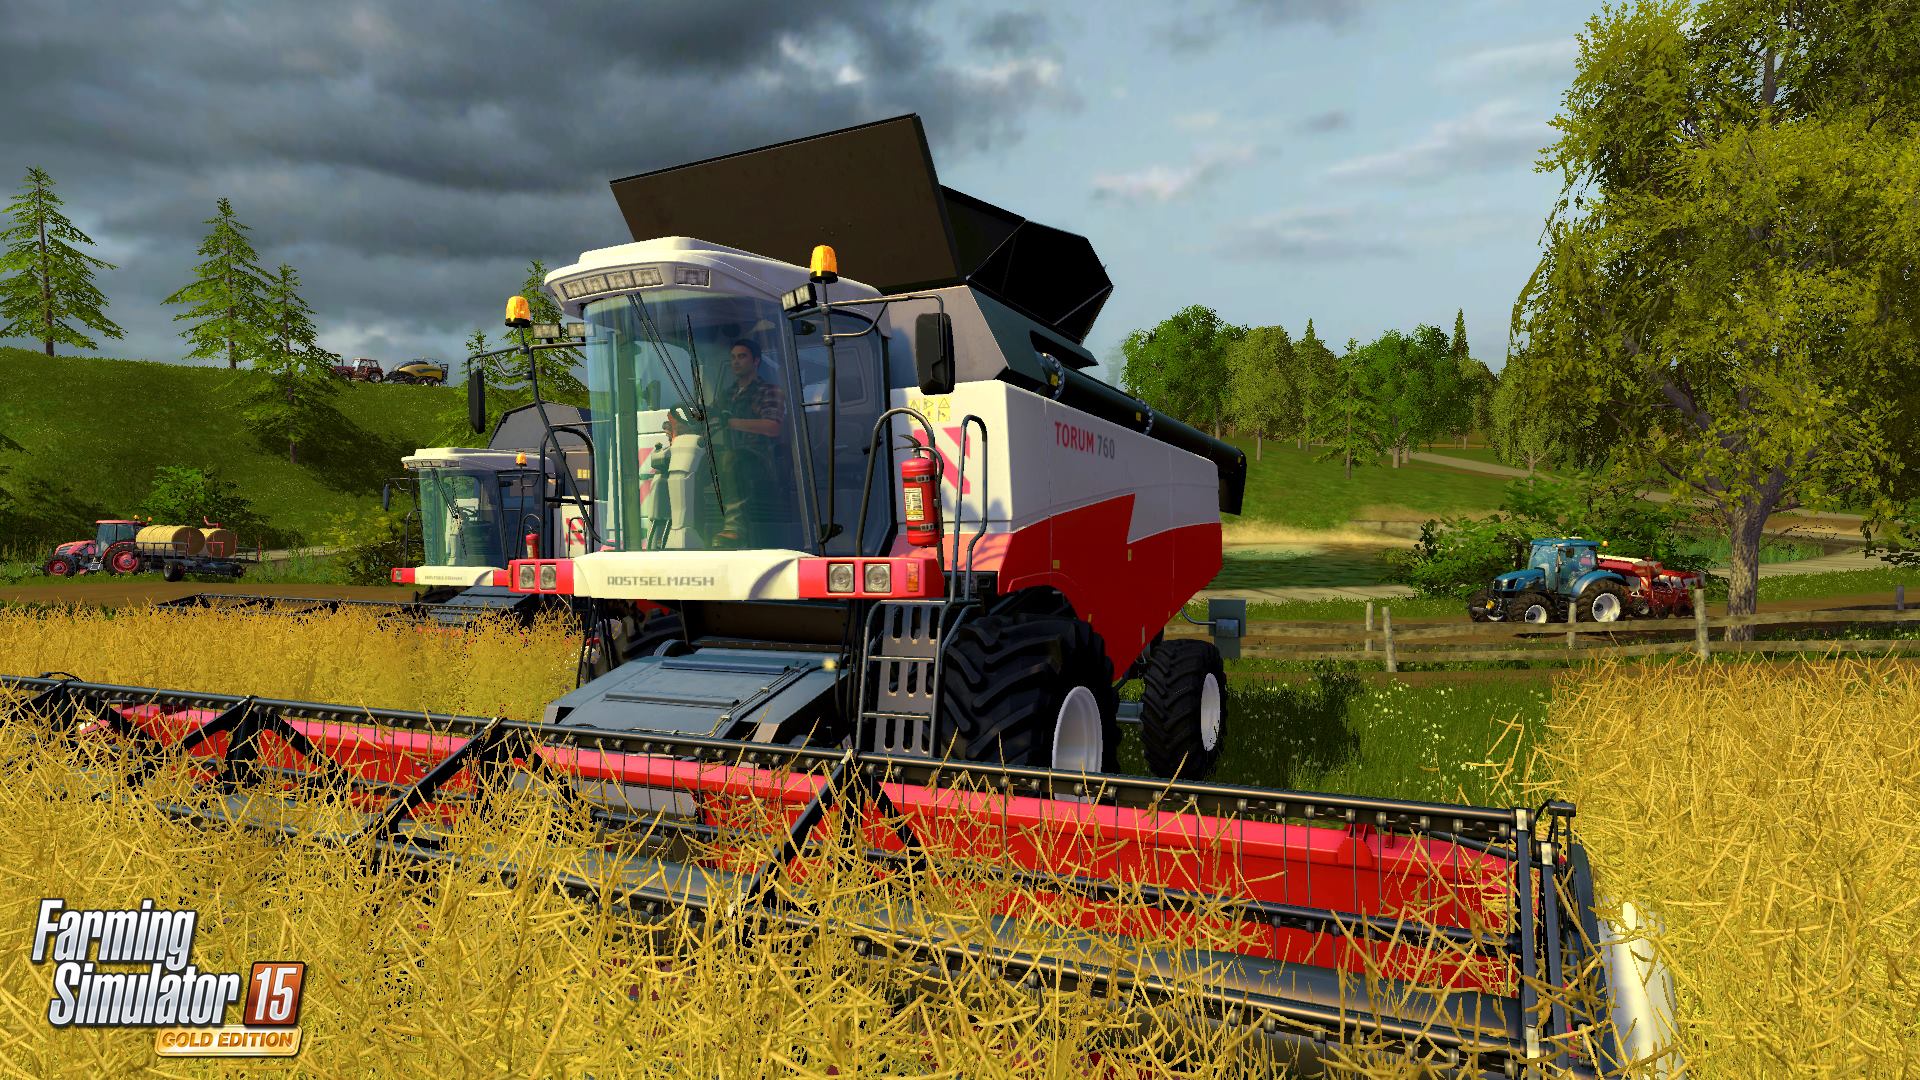 NEW IMAGES FOR FARMING SIMULATOR 15 GOLD